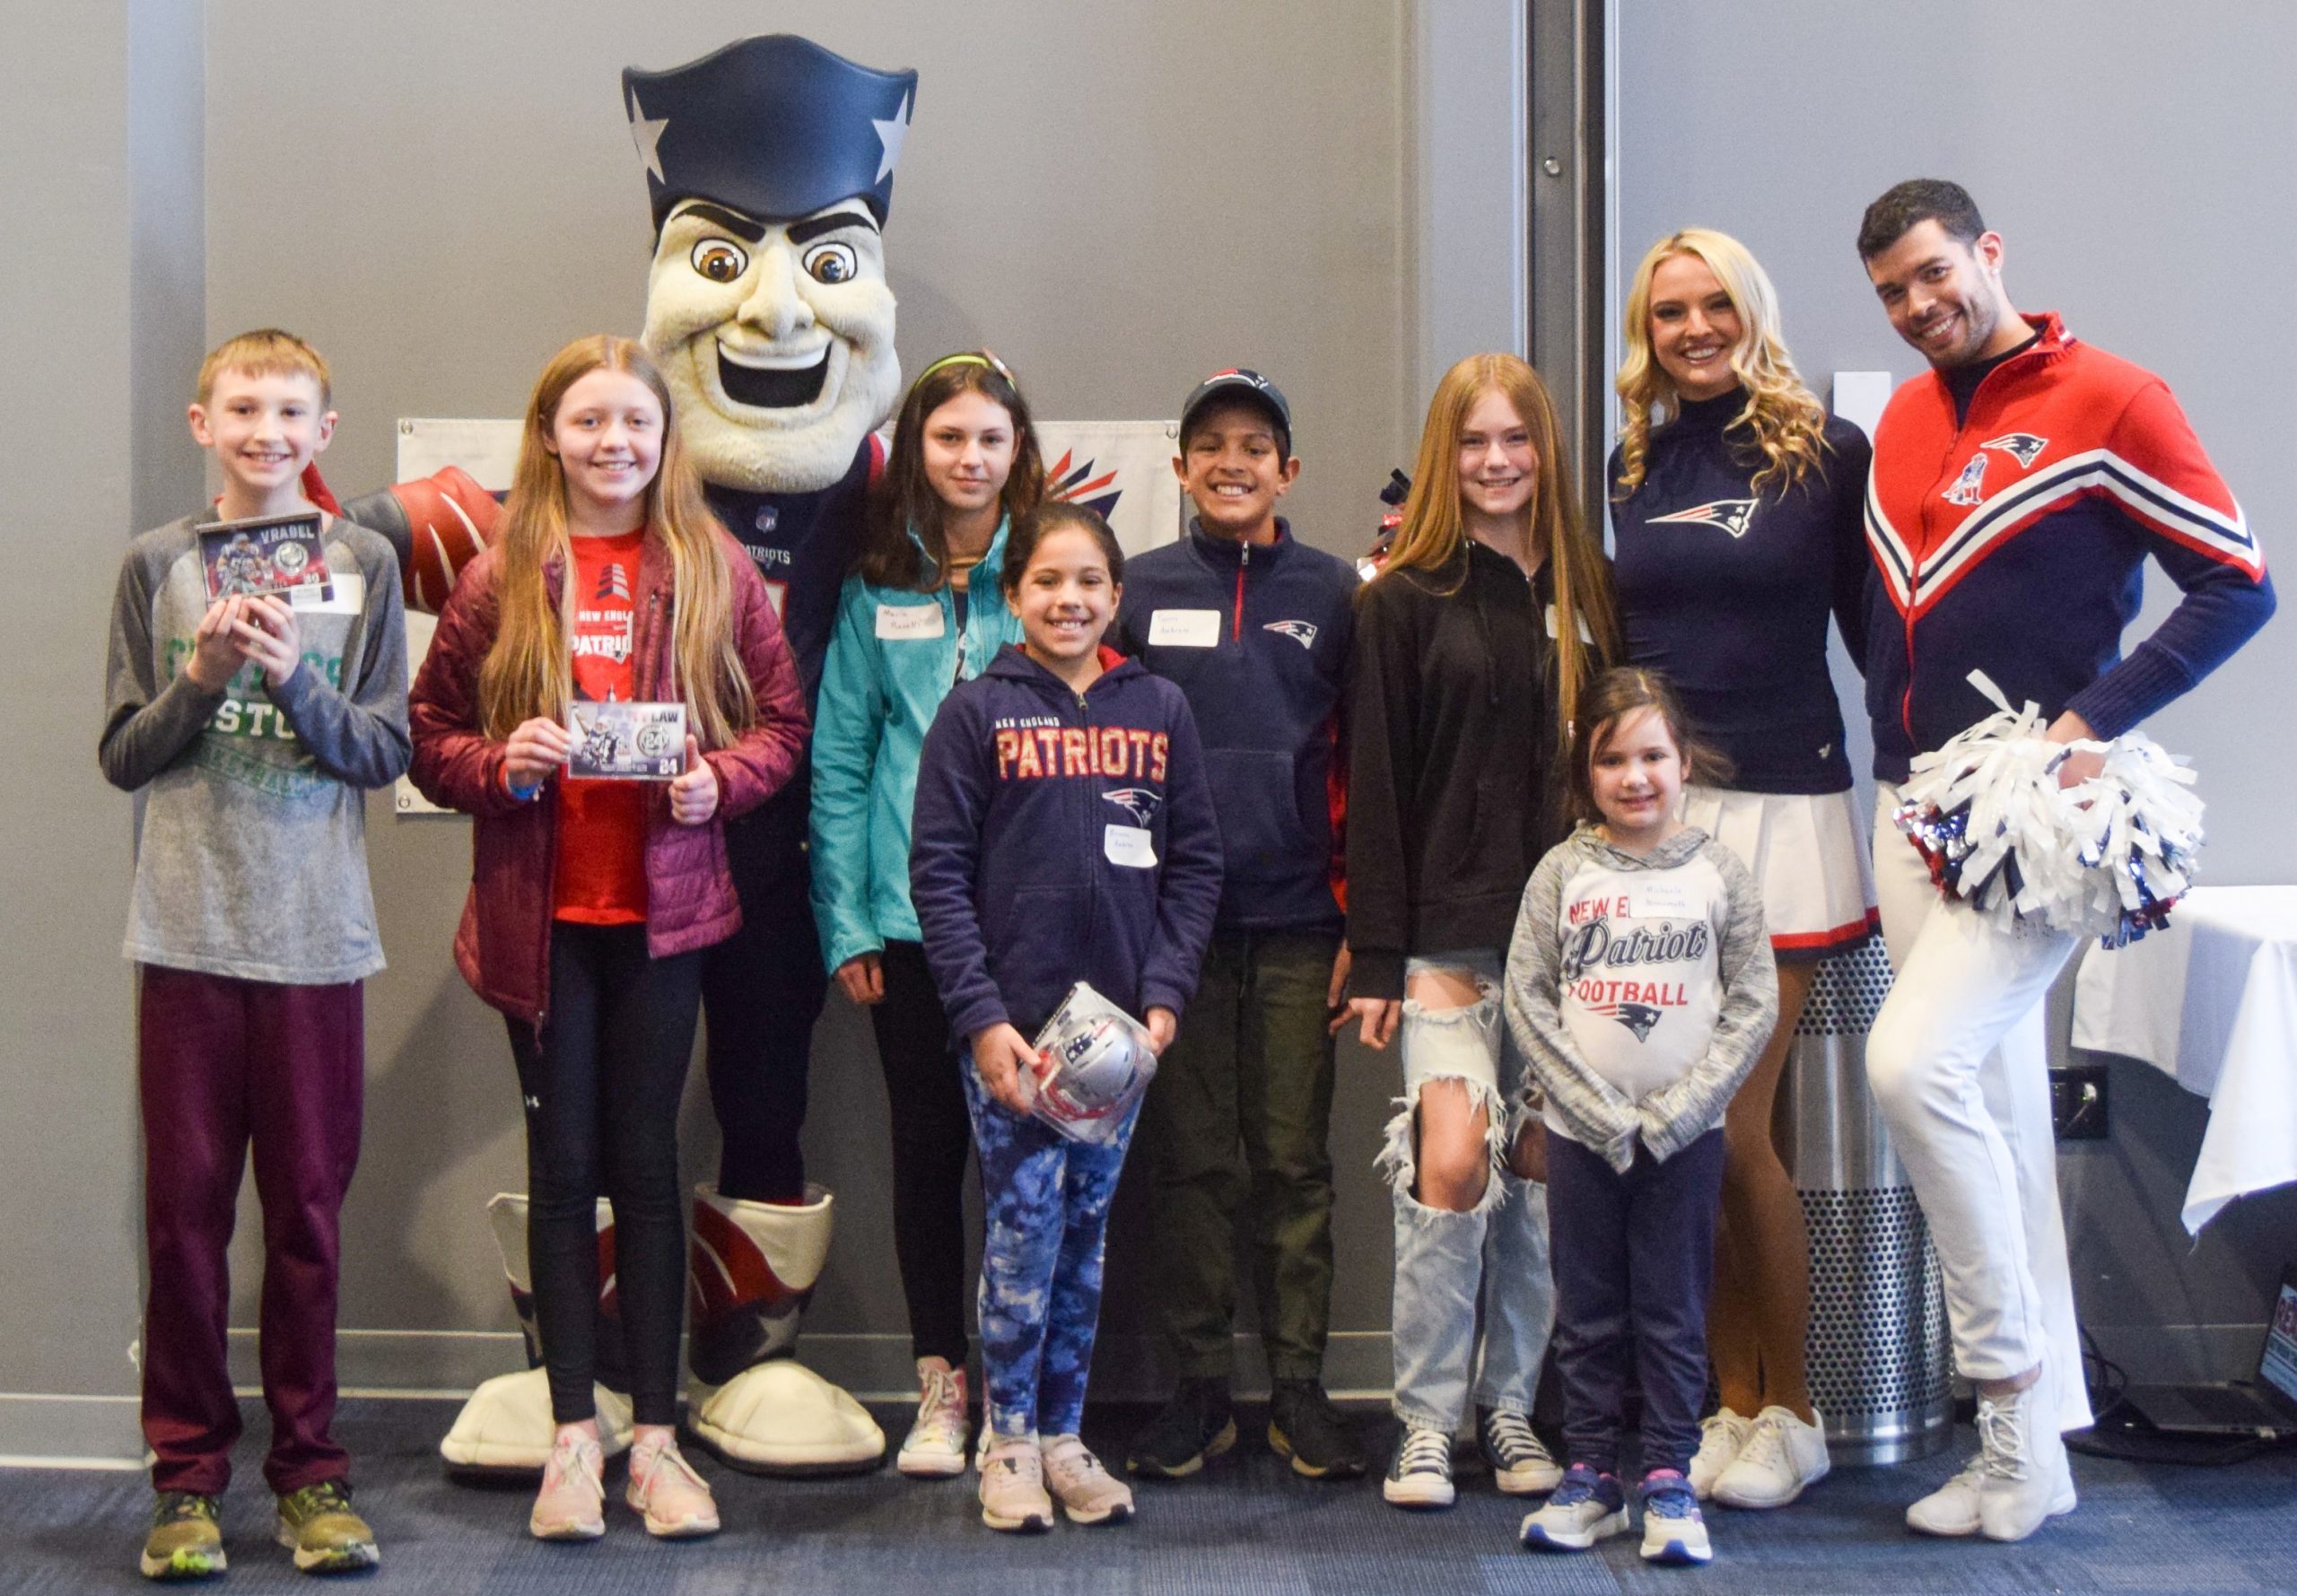 Smiling students pose with their challenge prizes standing with Patriots cheerleaders and mascot